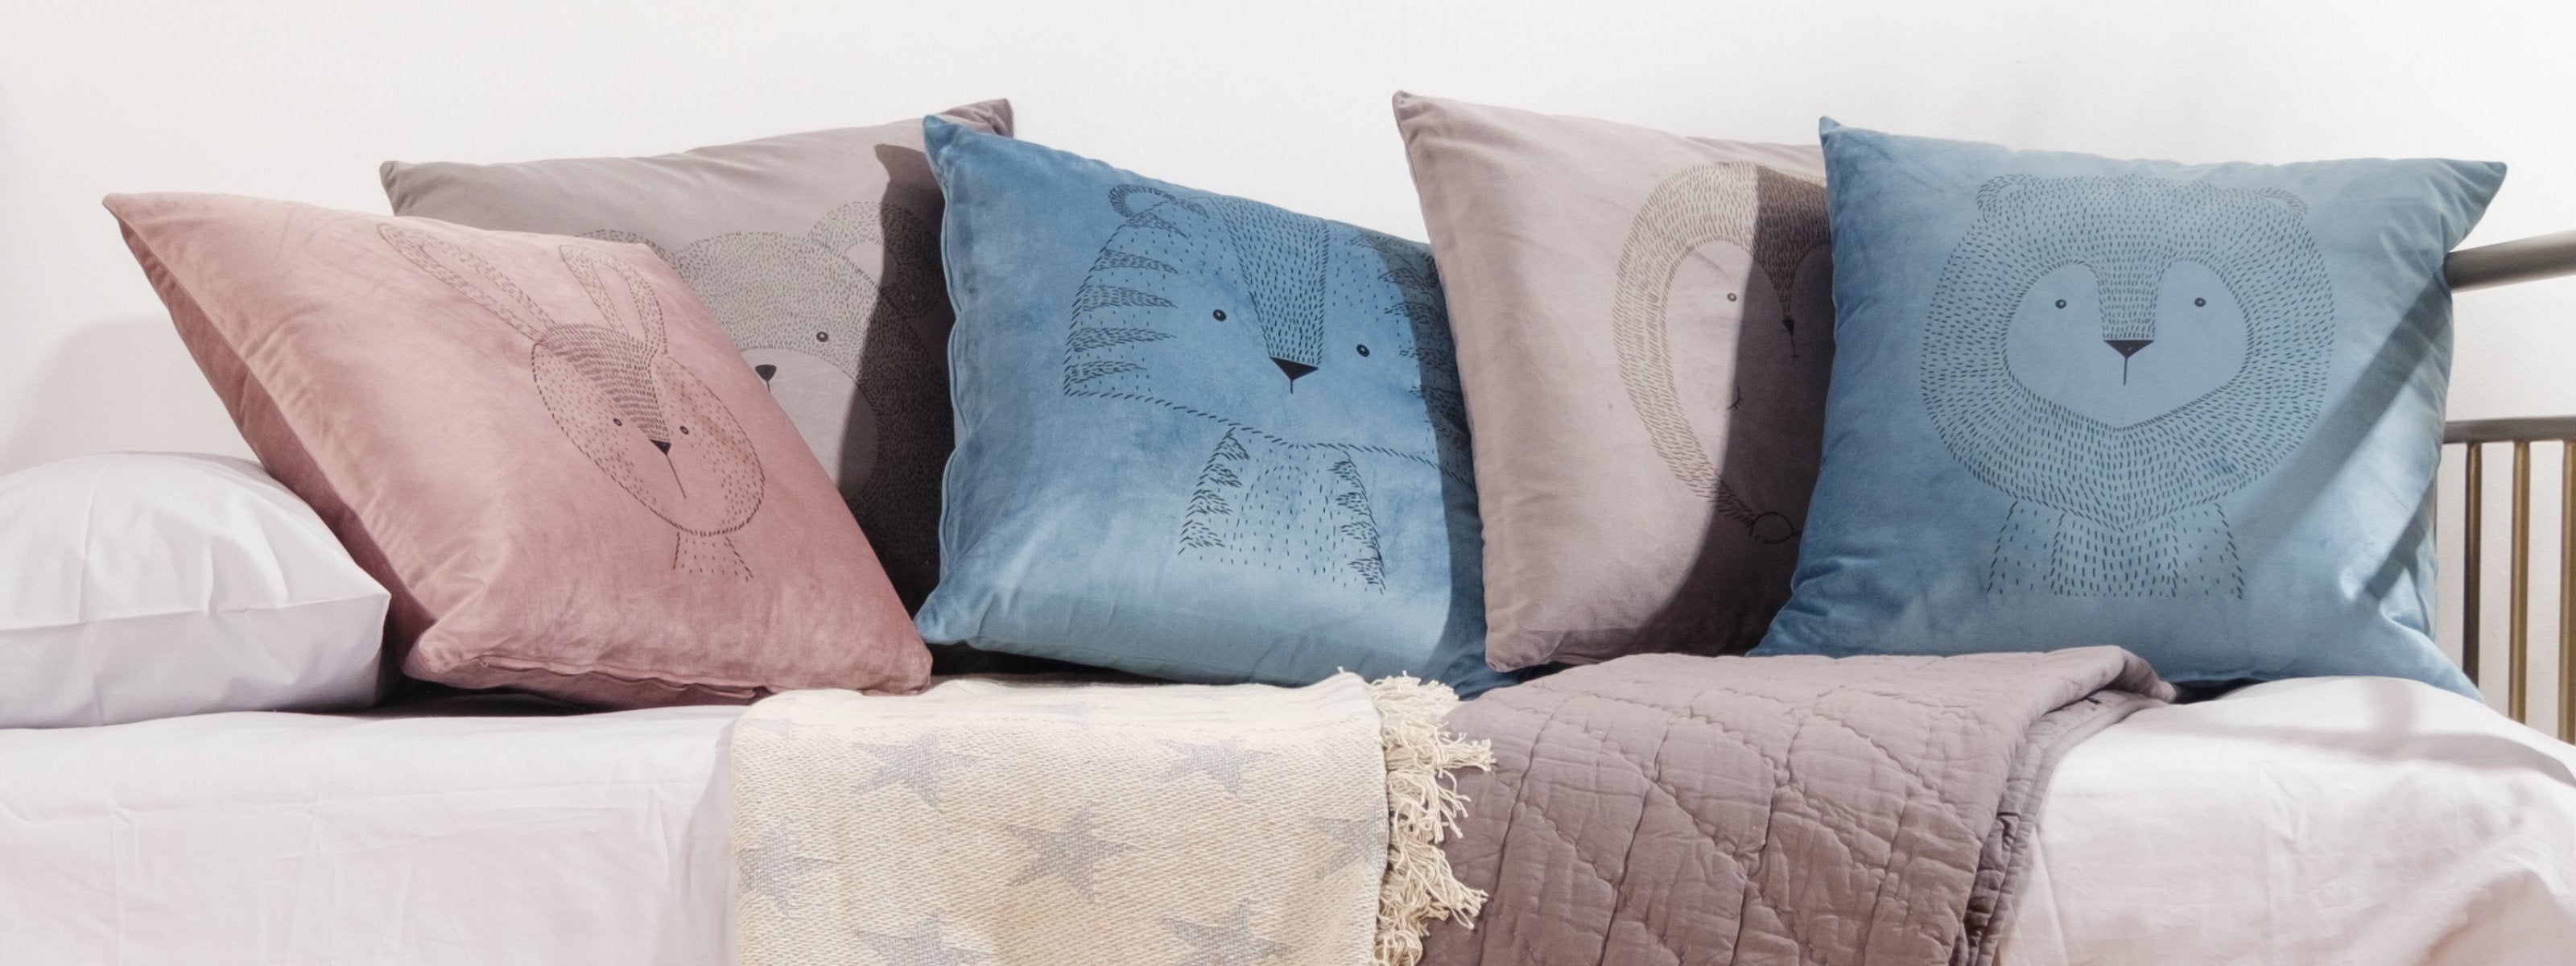 scatter cushions on a bed